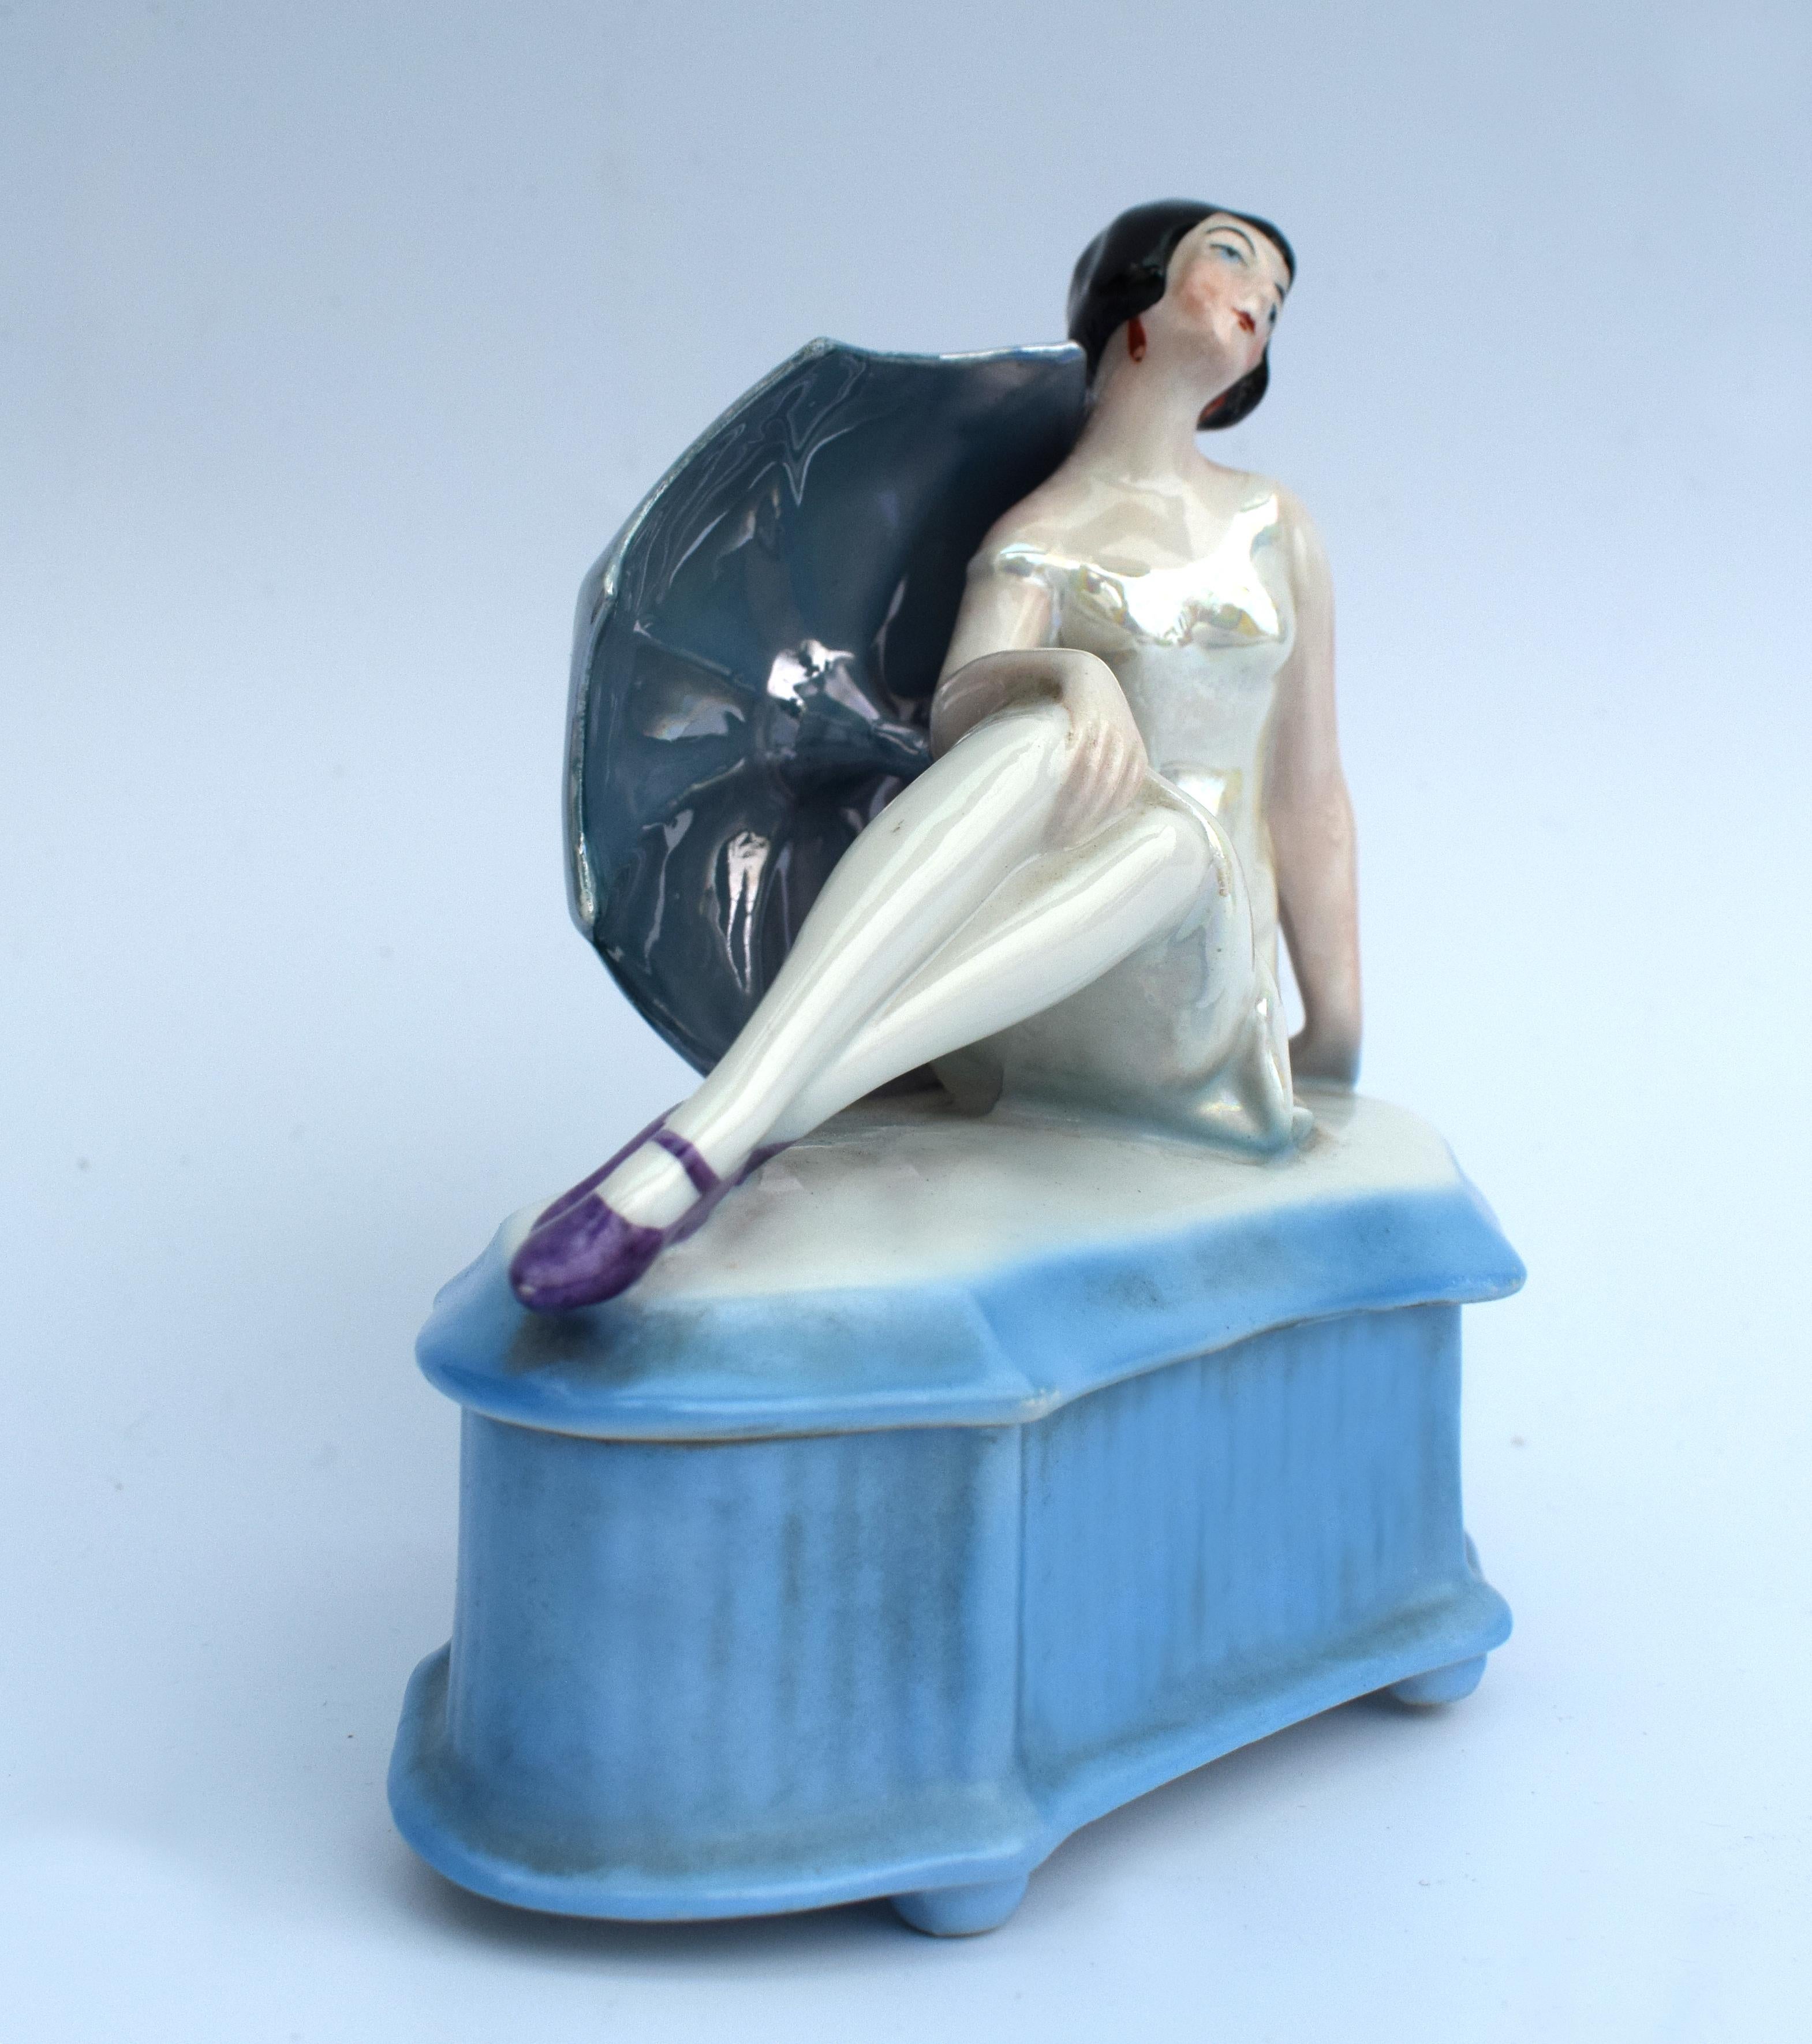 For your consideration is this very attractive and totally original 1930s Art Deco ladies powder/ trinket box. Made from porcelain with a vibrantly colored painted finish. Highly functional, collectable and decorative. A lovely piece. She's free